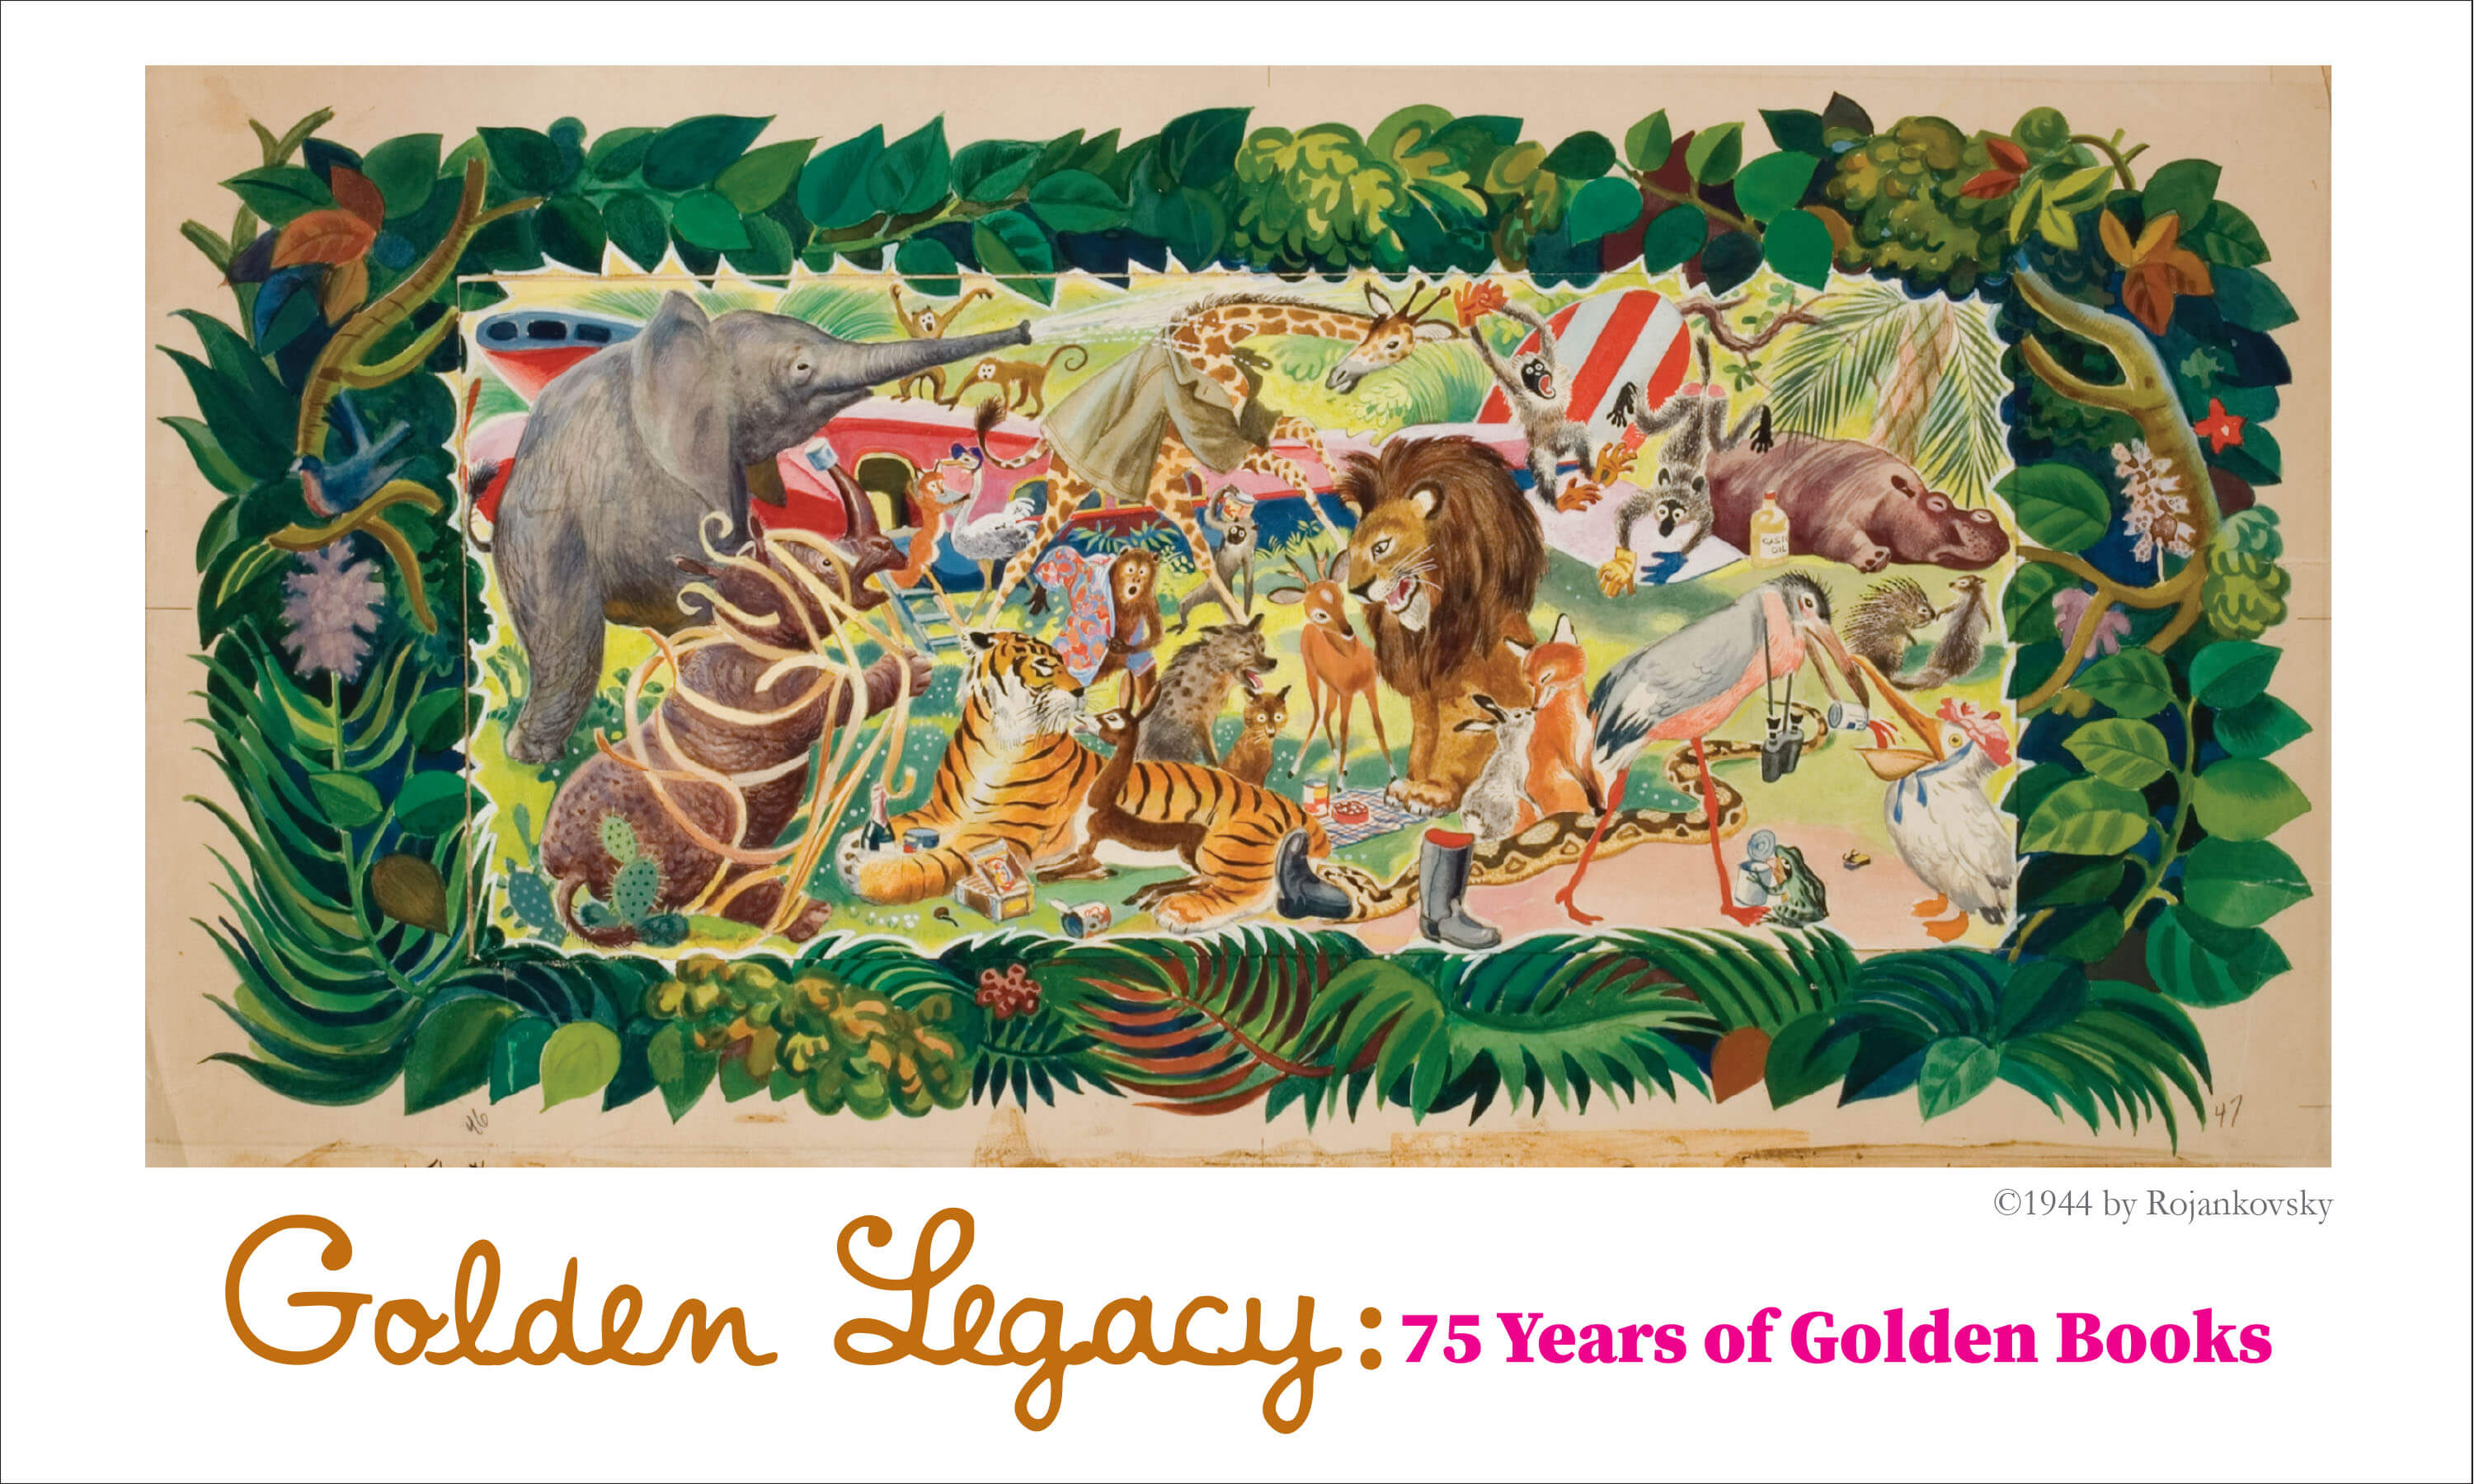 Golden Legacy: 75 Years of Golden Books